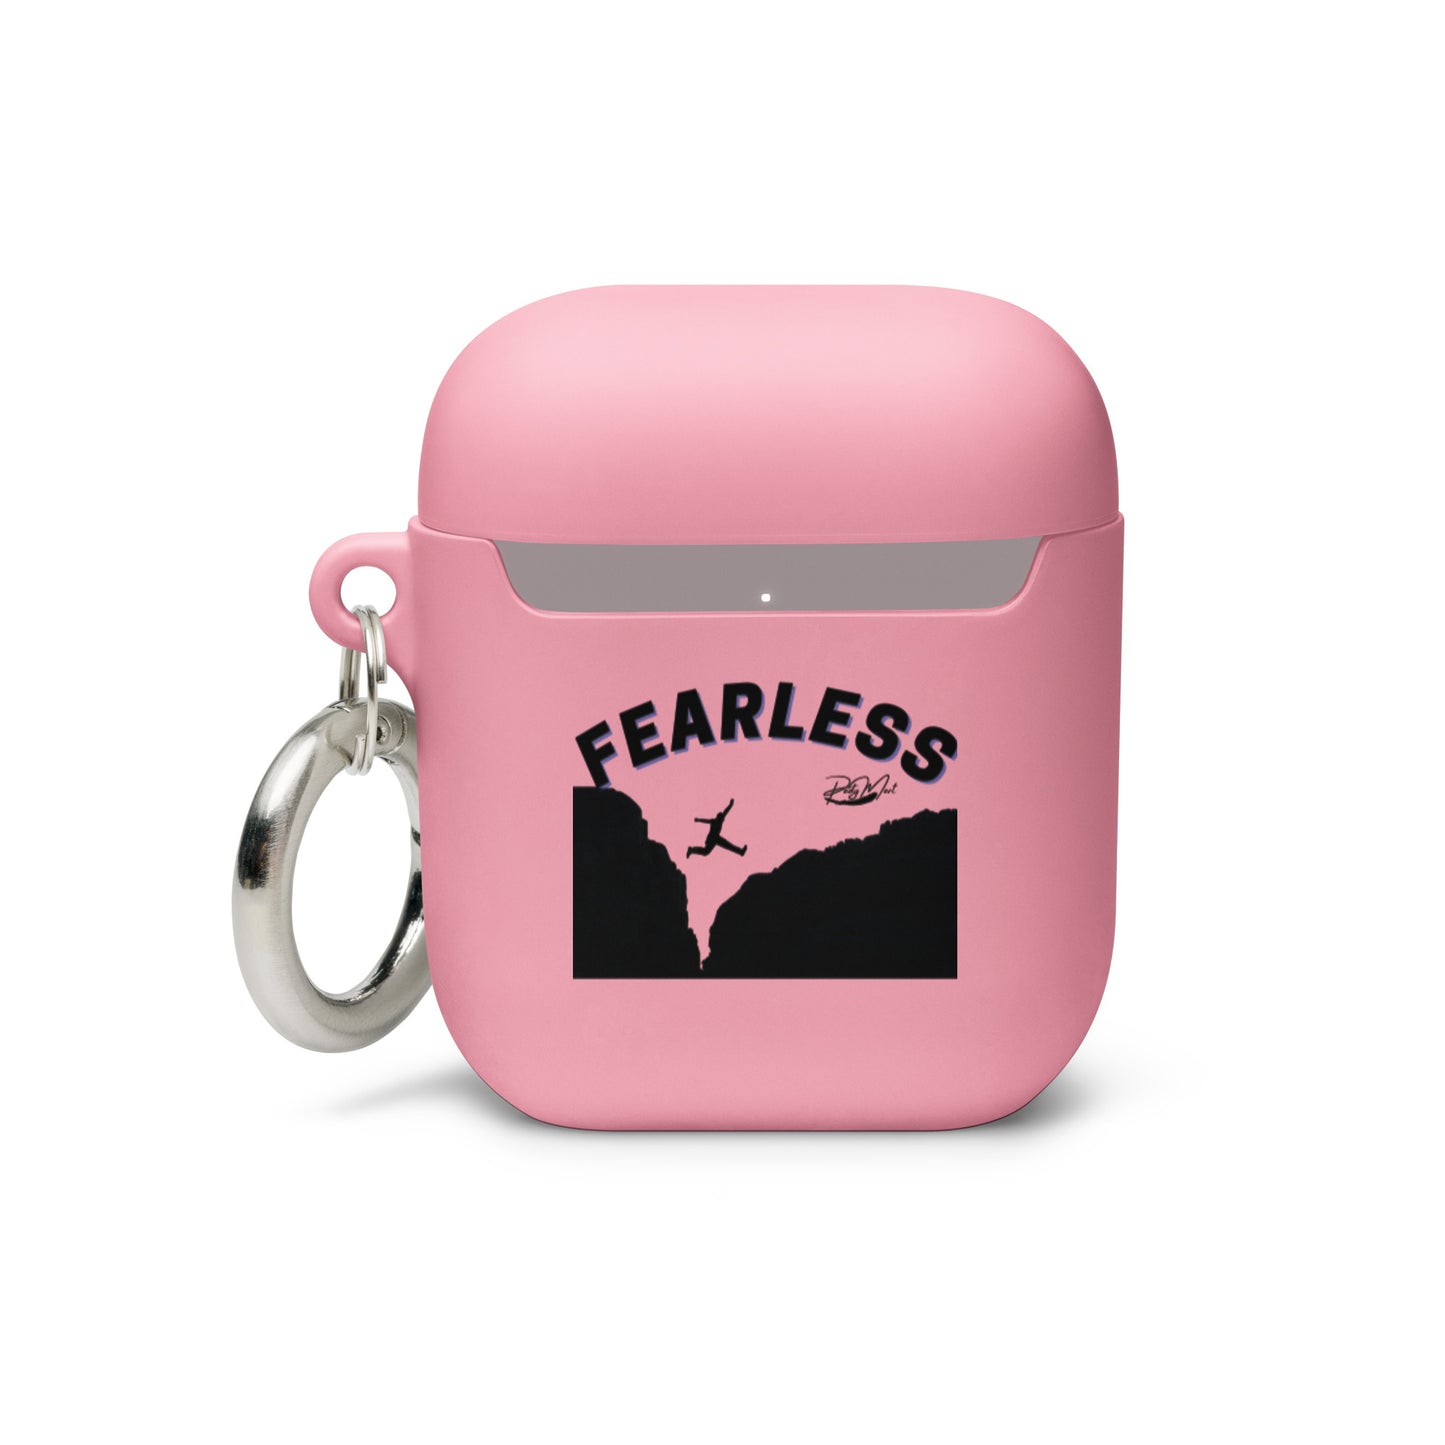 Fearless AirPods case